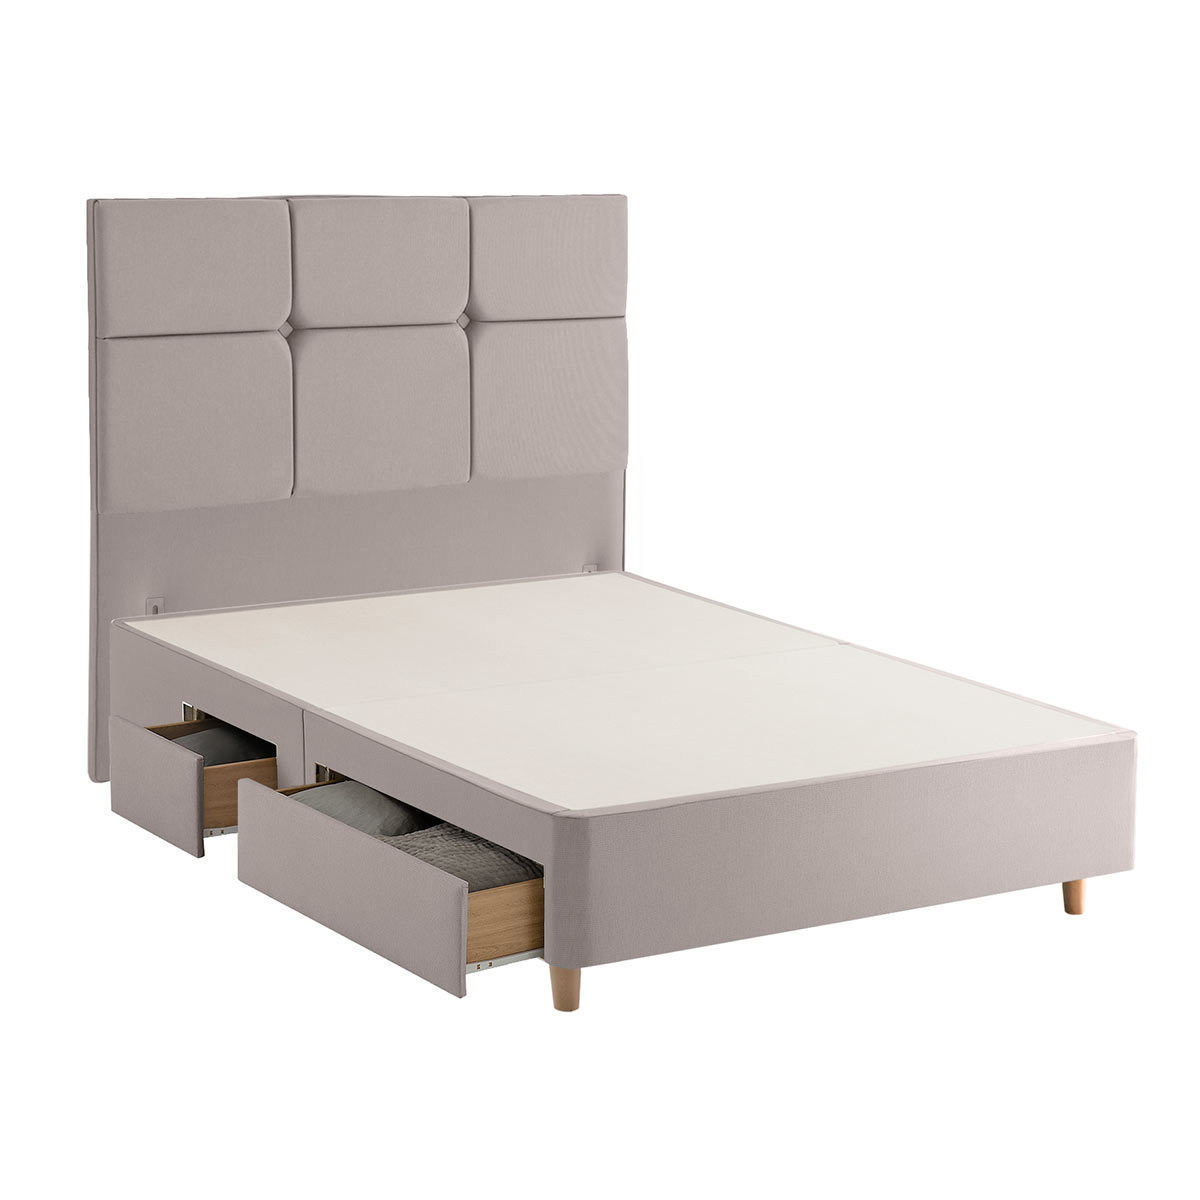 Cut out image of divan base and headboard in dove grey on white background 4 drawers open